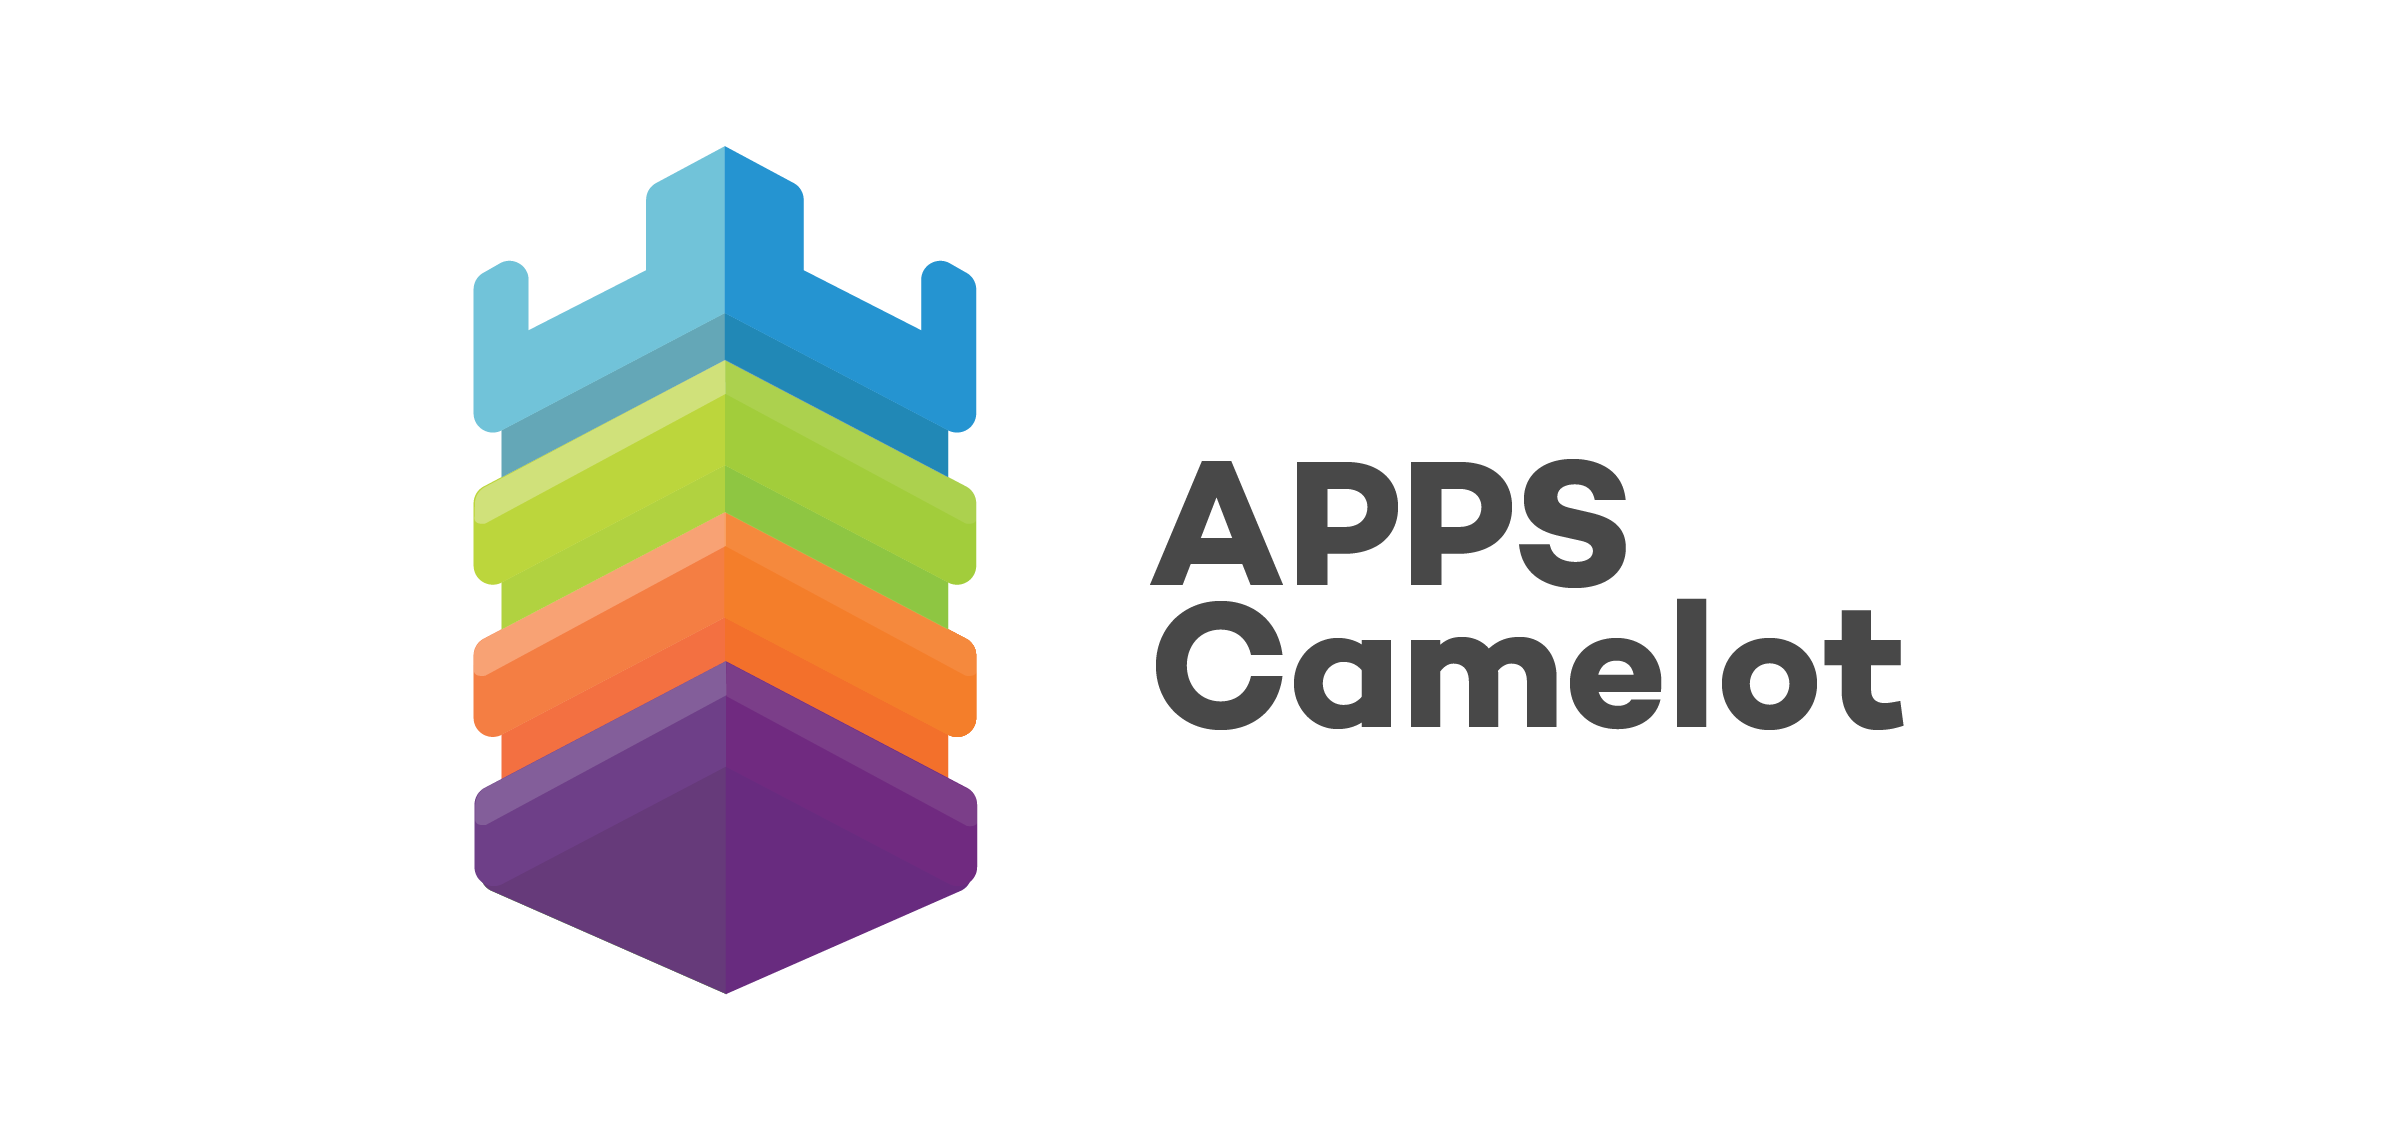 APPS CAMELOT